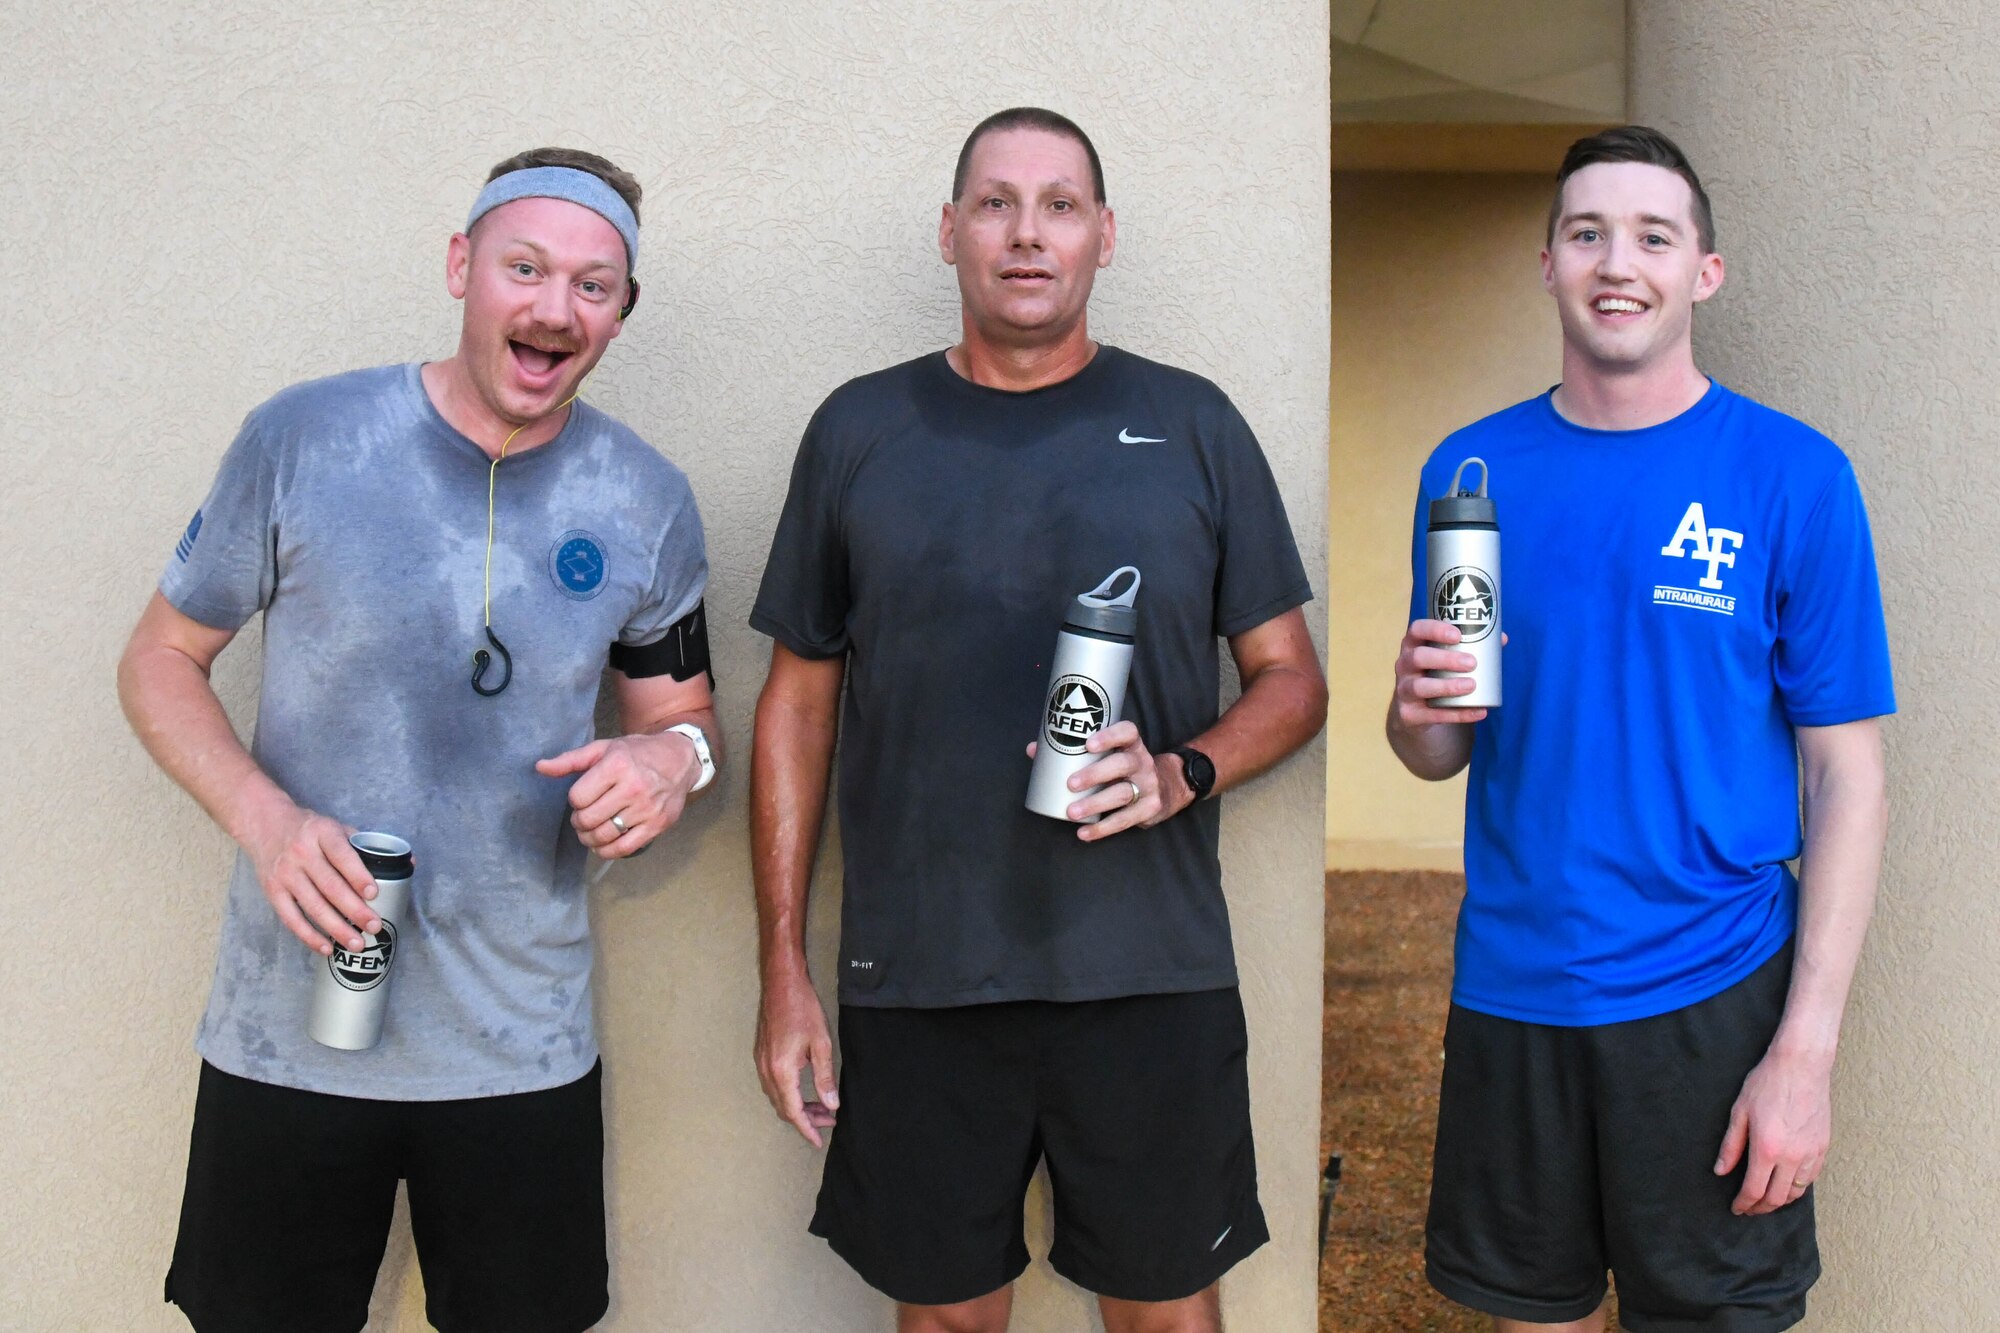 The top three runners from the National Preparedness Month 5k, U.S. Air Force Master Sgt. Kyle Adams, 97th Wing Staff Agencies first sergeant, Senior Master Sgt. Justin Stennes, 97th Civil Engineer Squadron (CES) assistant fire chief and 1st Lt. Tyler Stout, 97th CES project programmer, pose for a photo on Altus Air Force Base, Oklahoma, Sept. 1, 2021. The CES Emergency Management Flight organized several events throughout the month of September to encourage disaster awareness and preparedness . (U.S. Air Force Photo by Airman 1st Class Trenton Jancze)